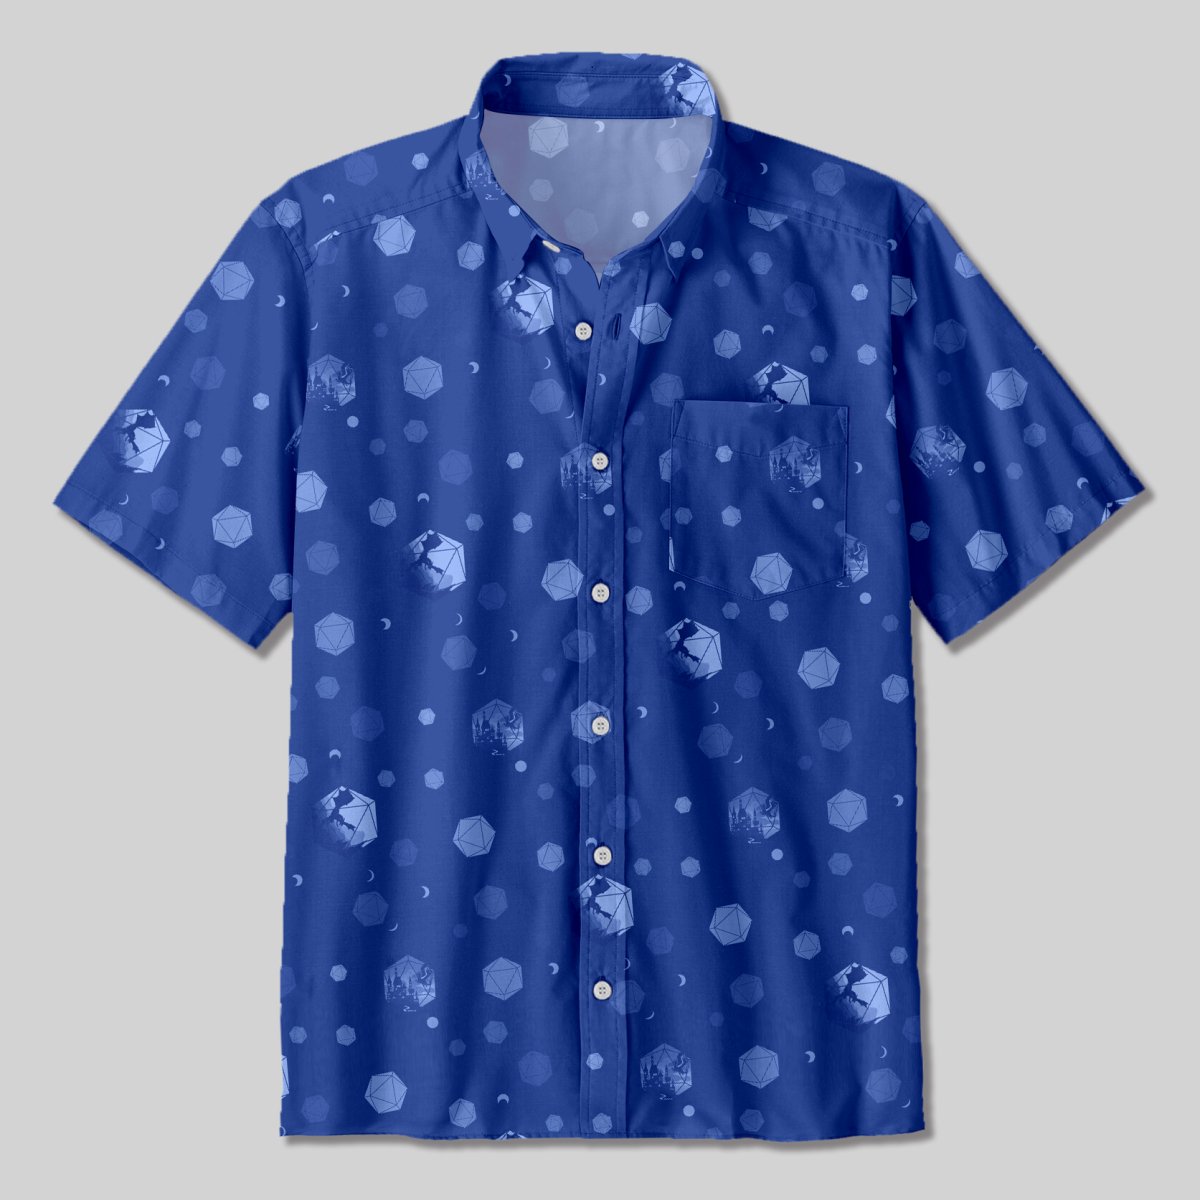 DND Moon and Colorful Dice Button Up Pocket Shirt - Geeksoutfit